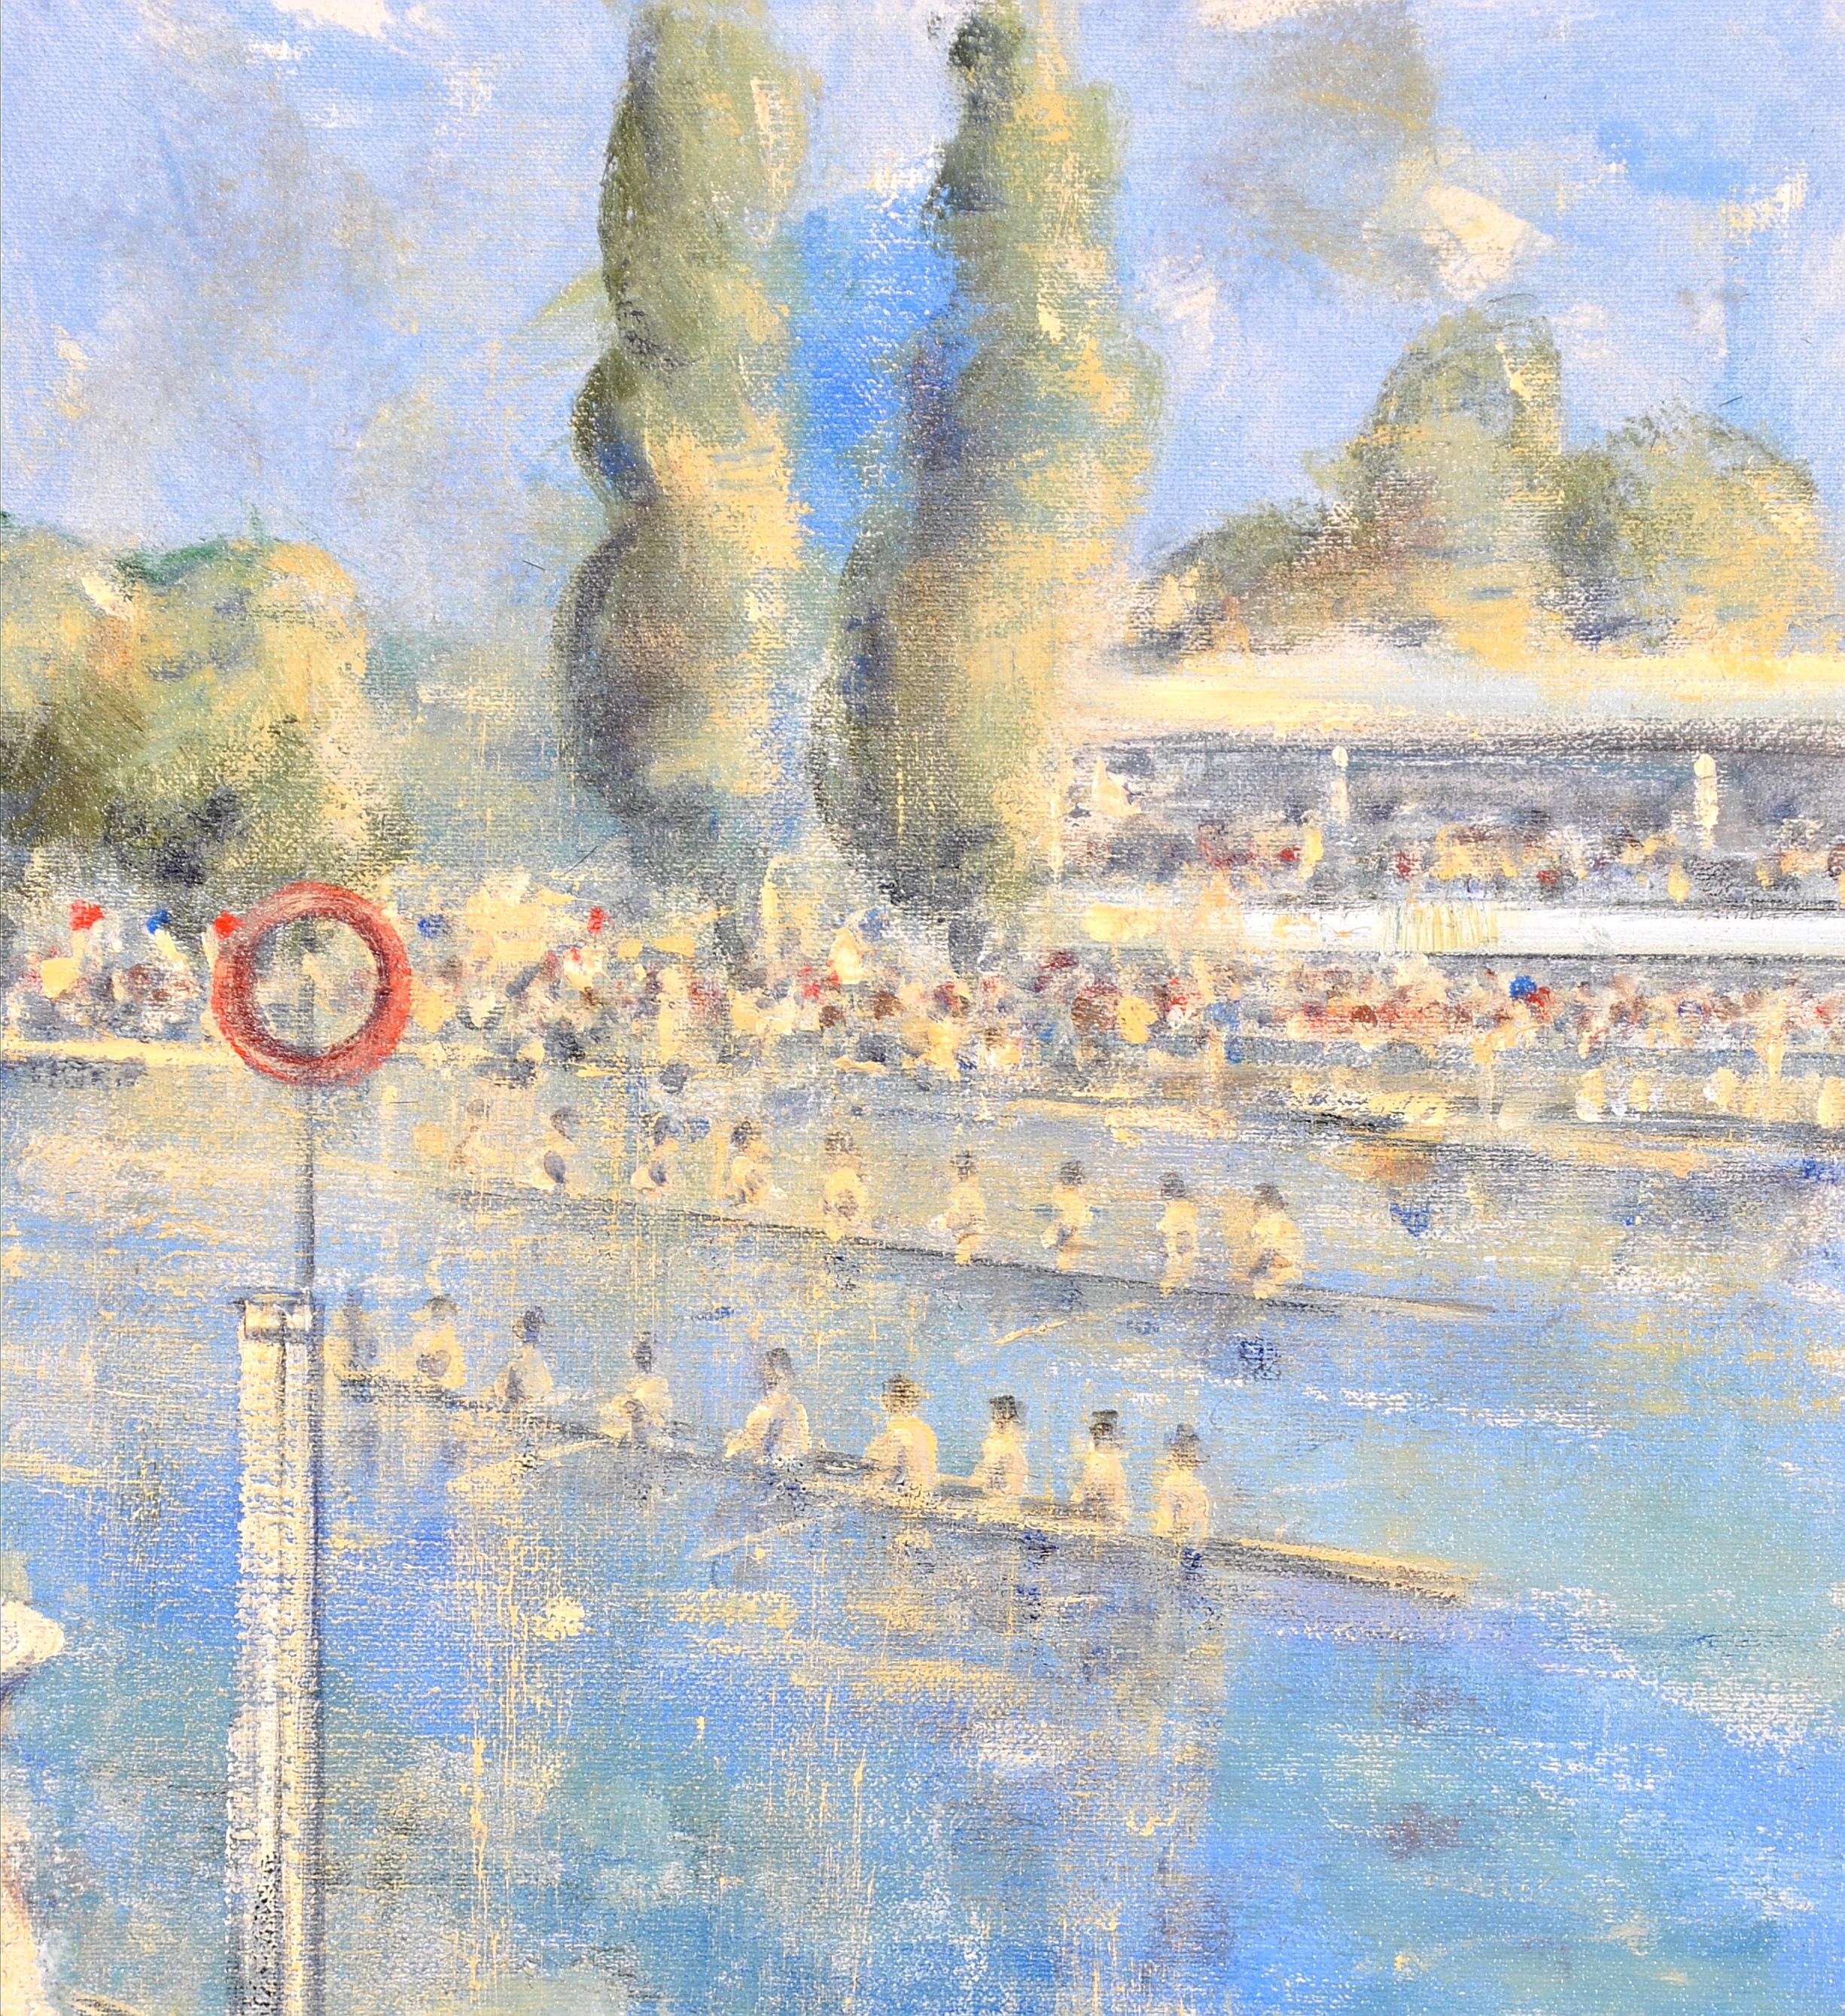 A beautiful 20th century oil on canvas board by the very popular English impressionist artist Walter John Beauvais. The work depicts fashionable ladies at the finish post of a rowing regatta, with two crews in front of a pavilion.

This superbly